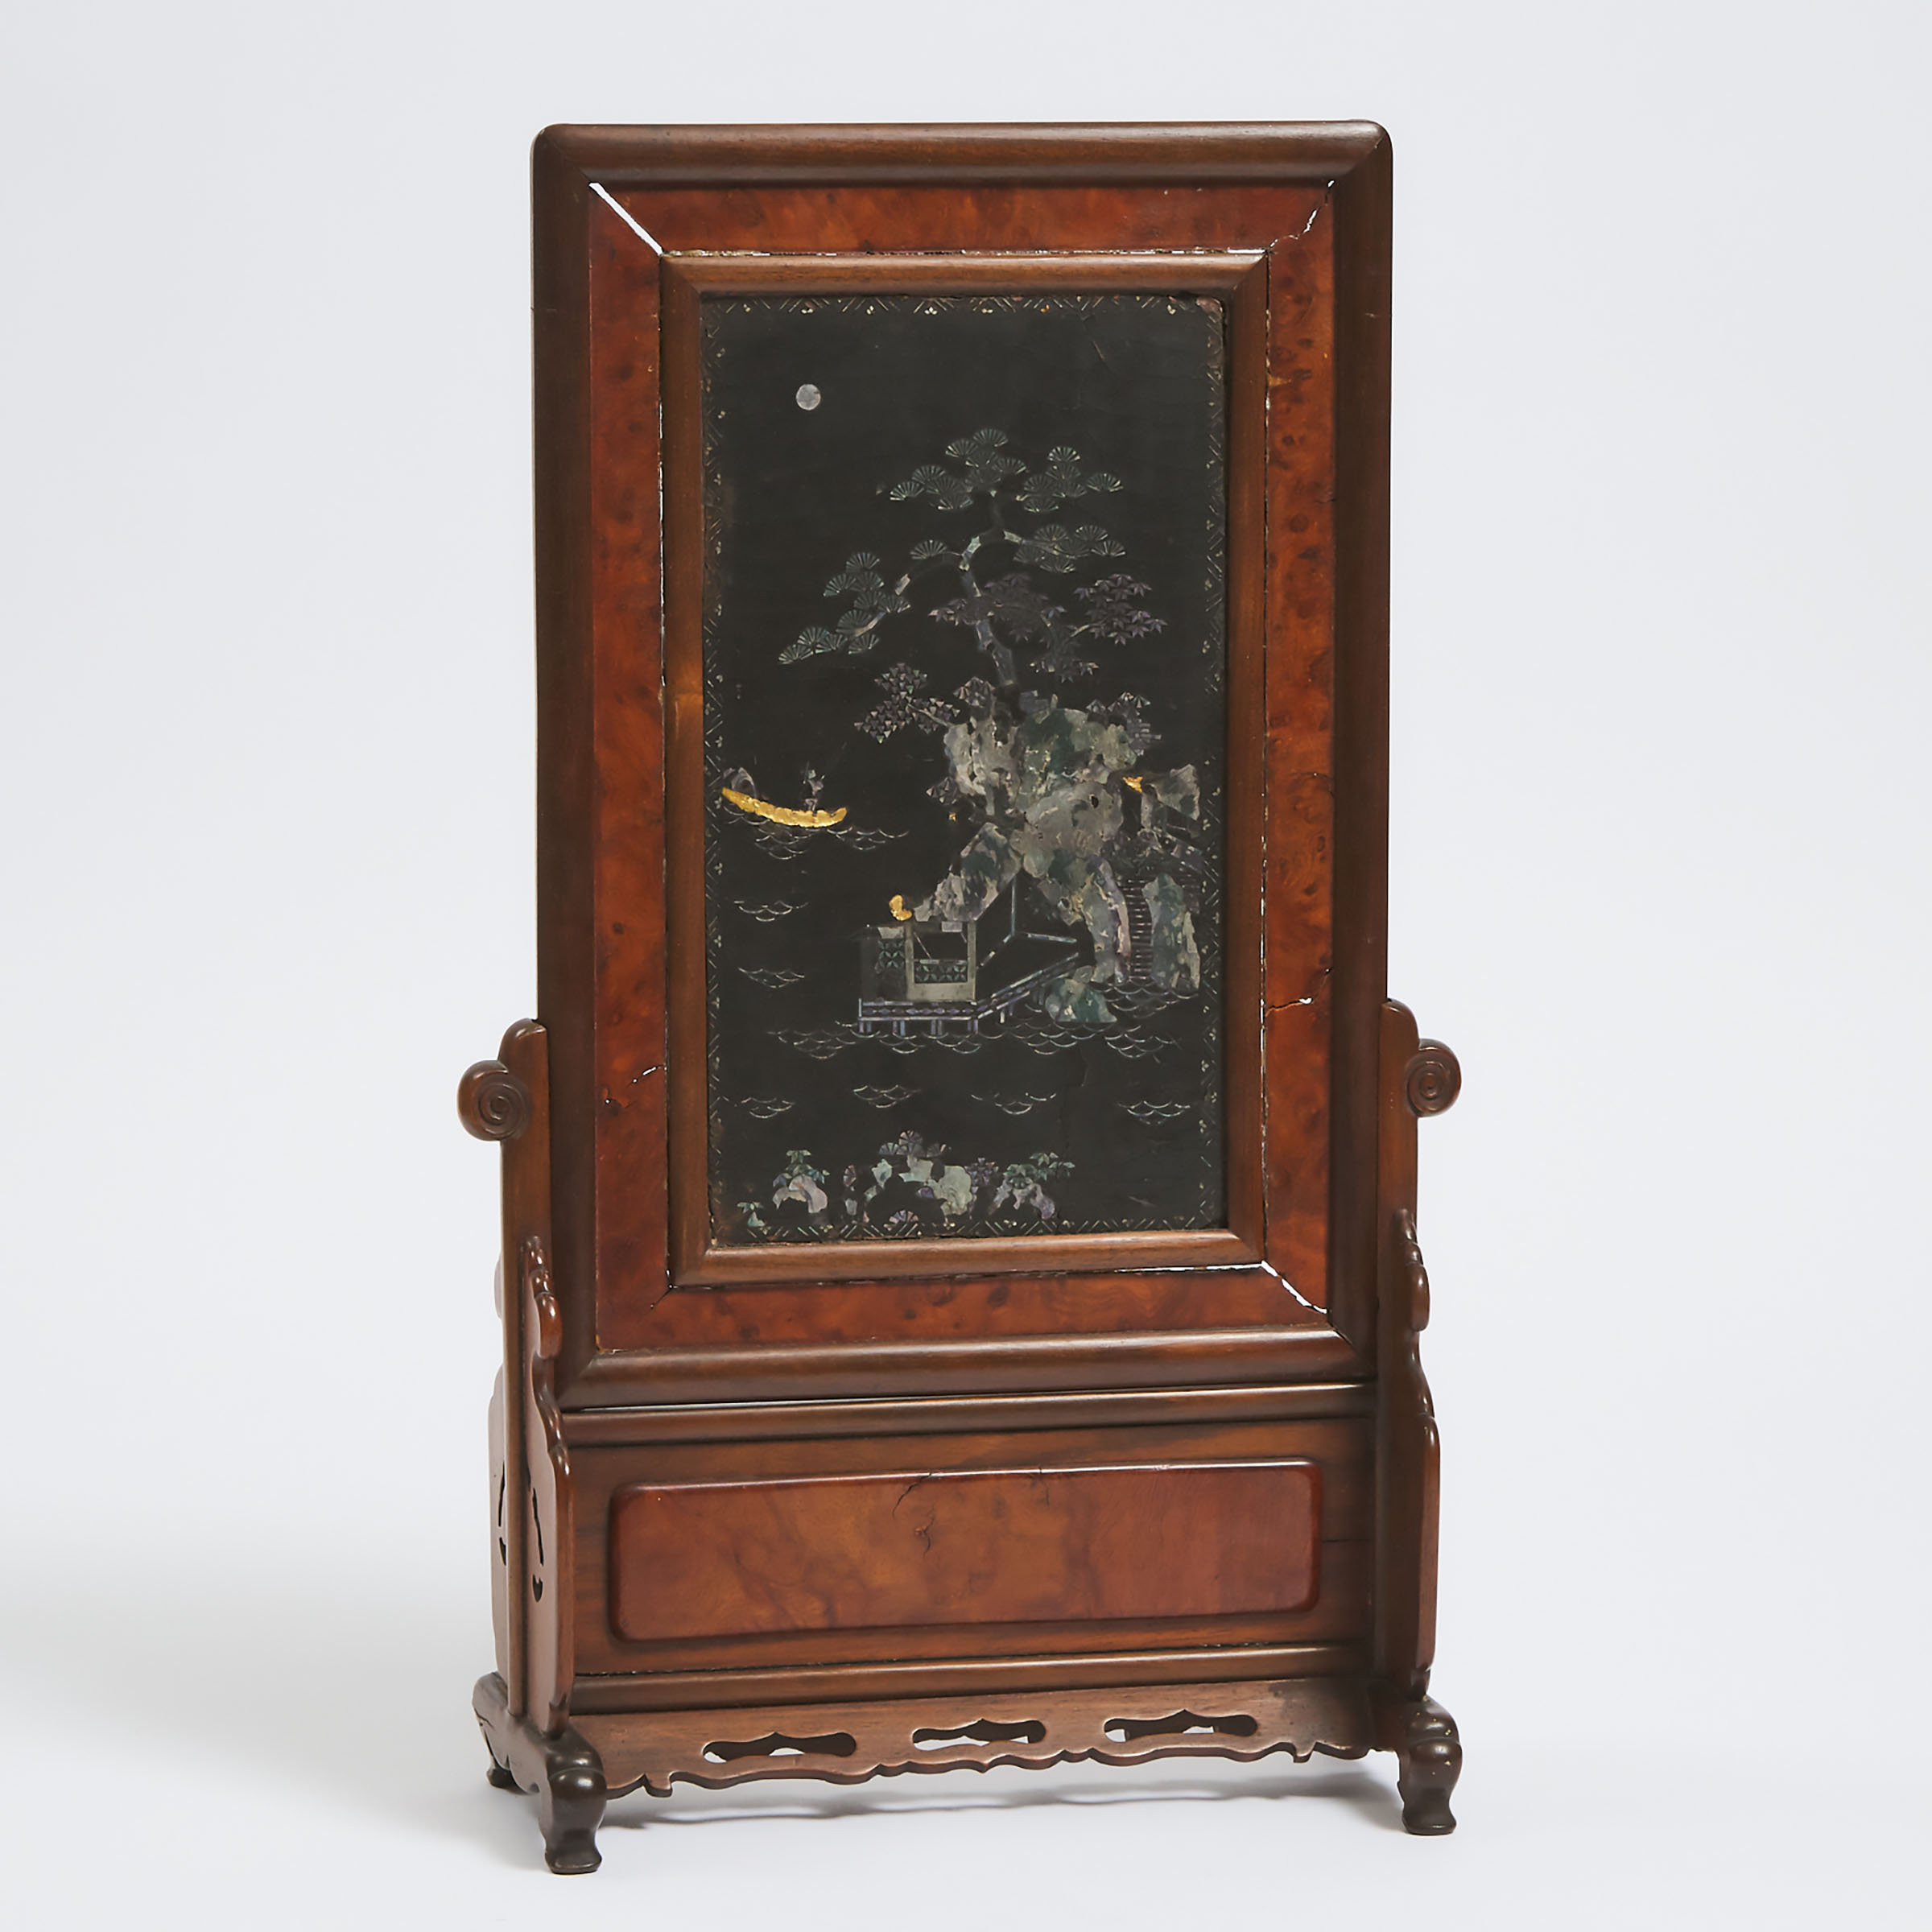 A Mother-of-Pearl Inlaid and Black-Lacquered Table Screen With Burlwood Inset Stand, Kangxi Period, Early 18th Century